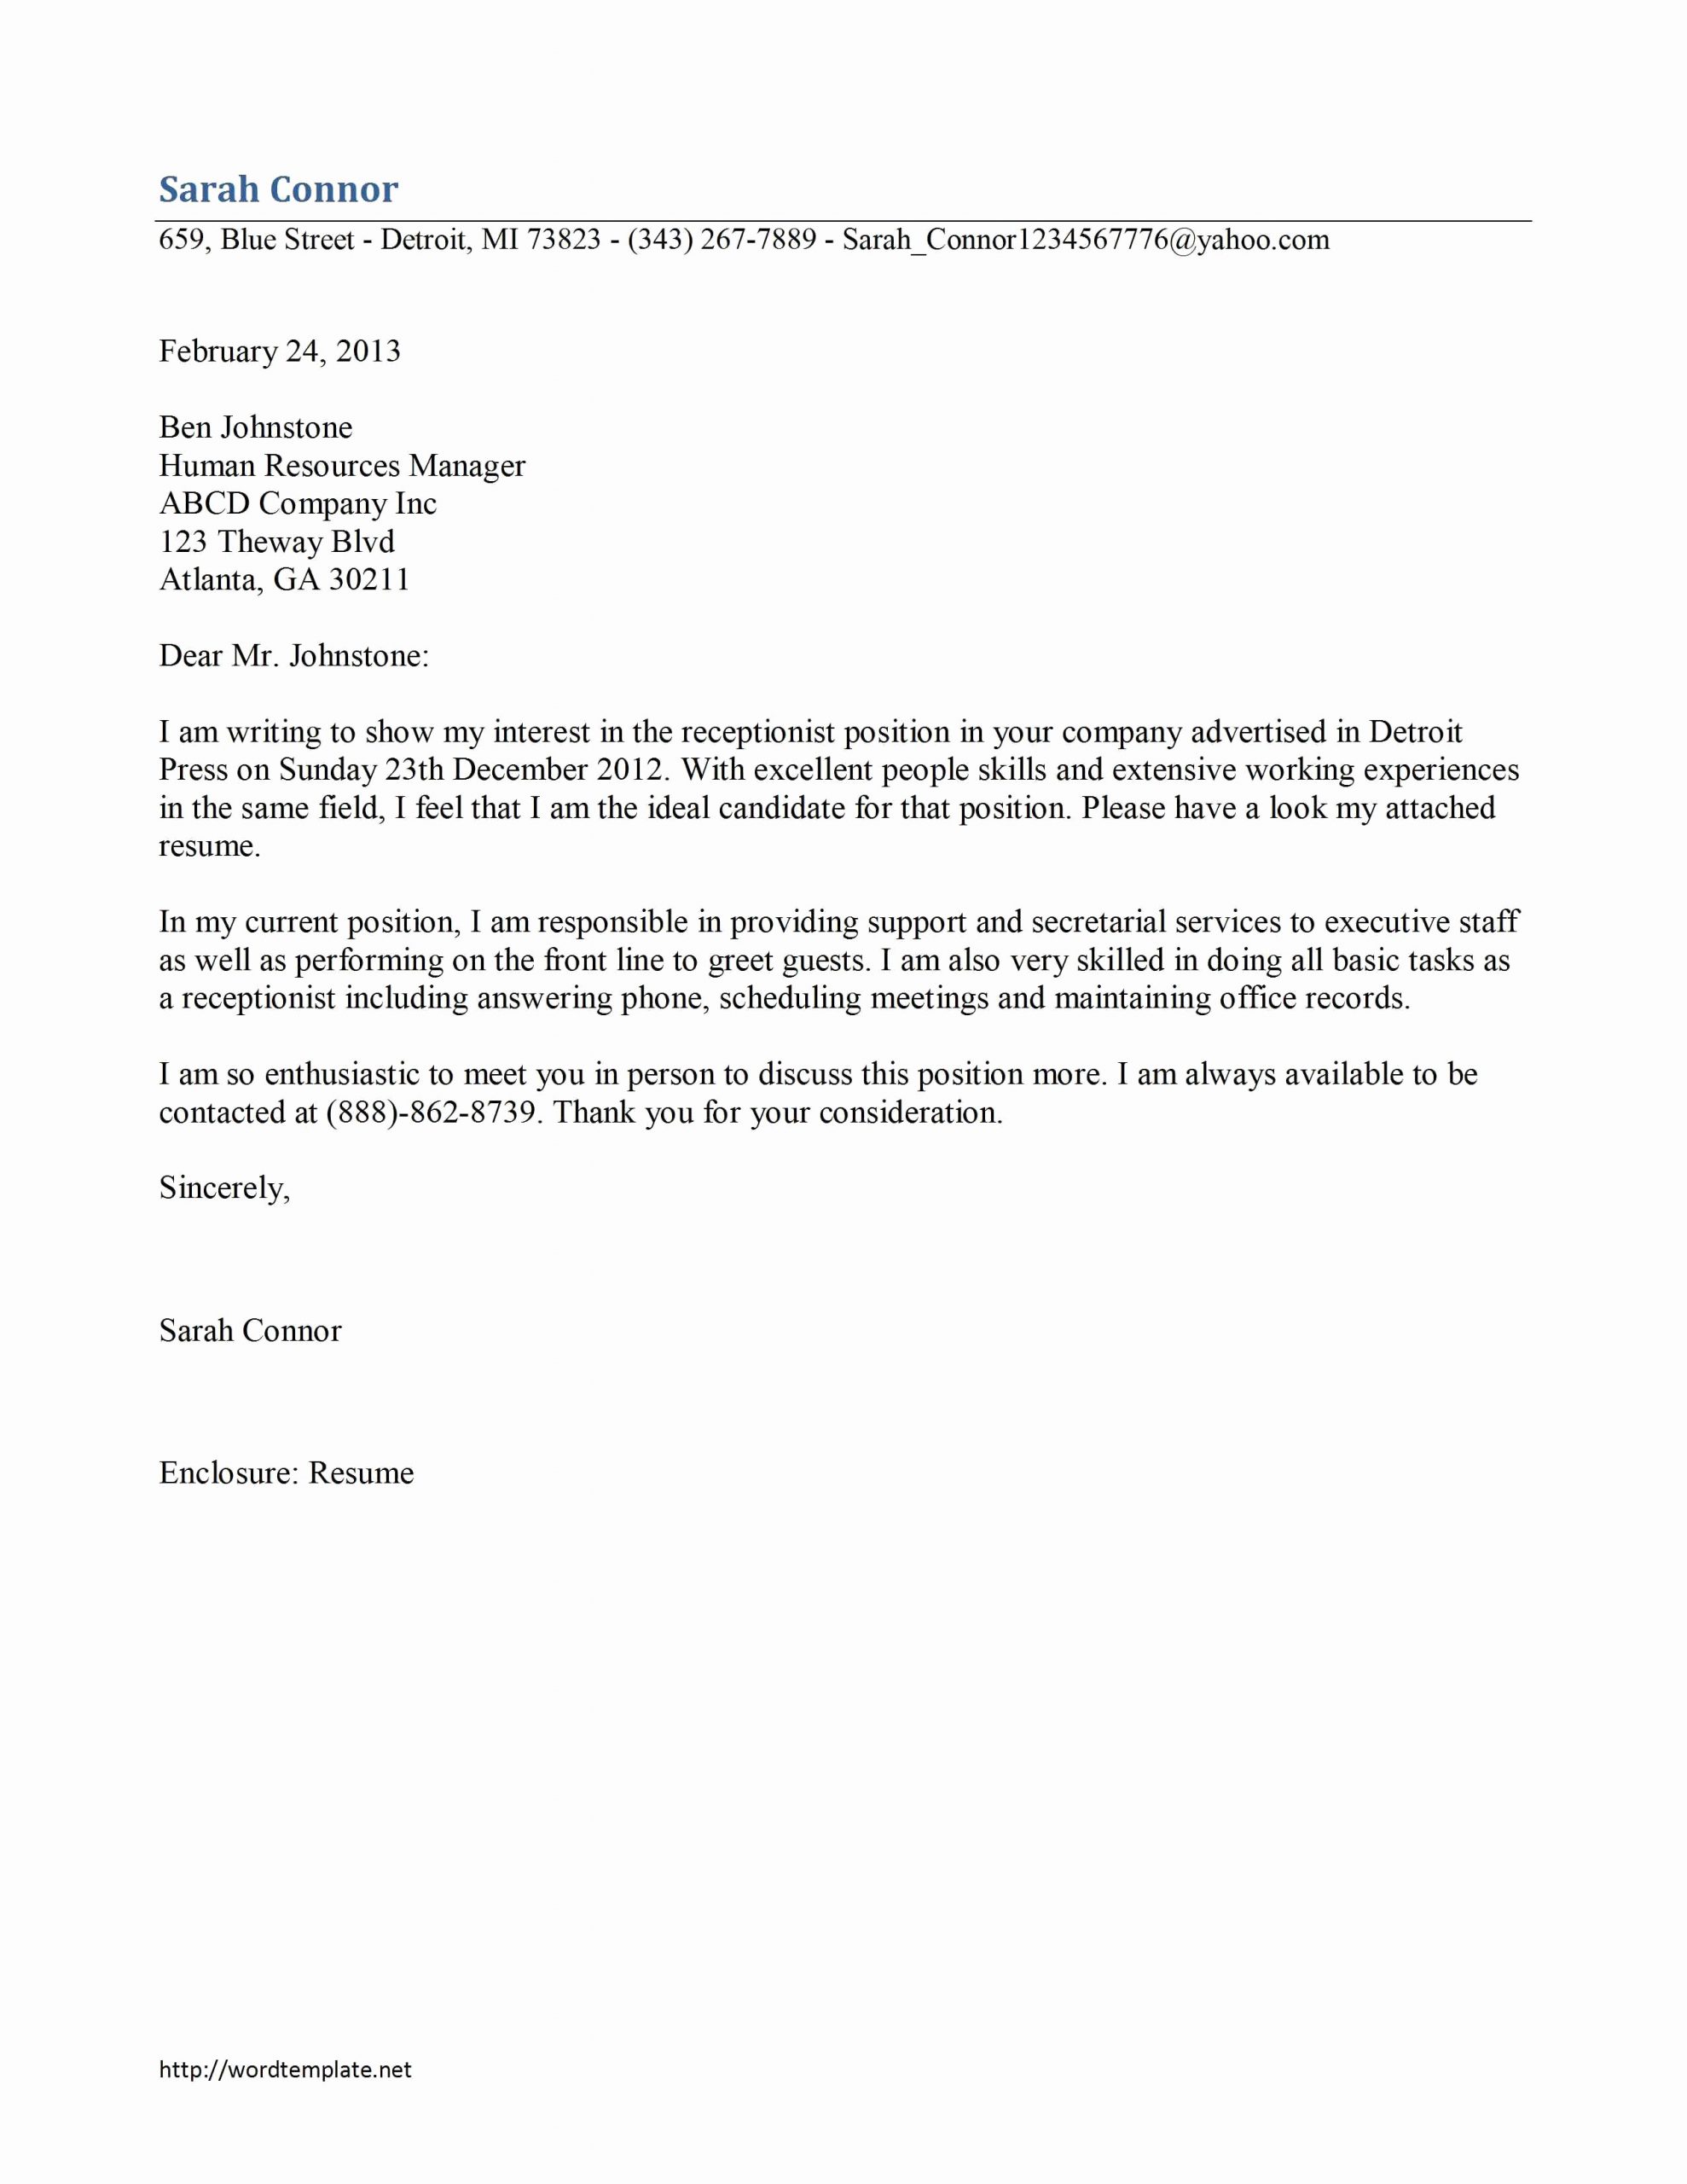 Missed Court Date Sample Letter : Apology Letter To A Judge For Missing